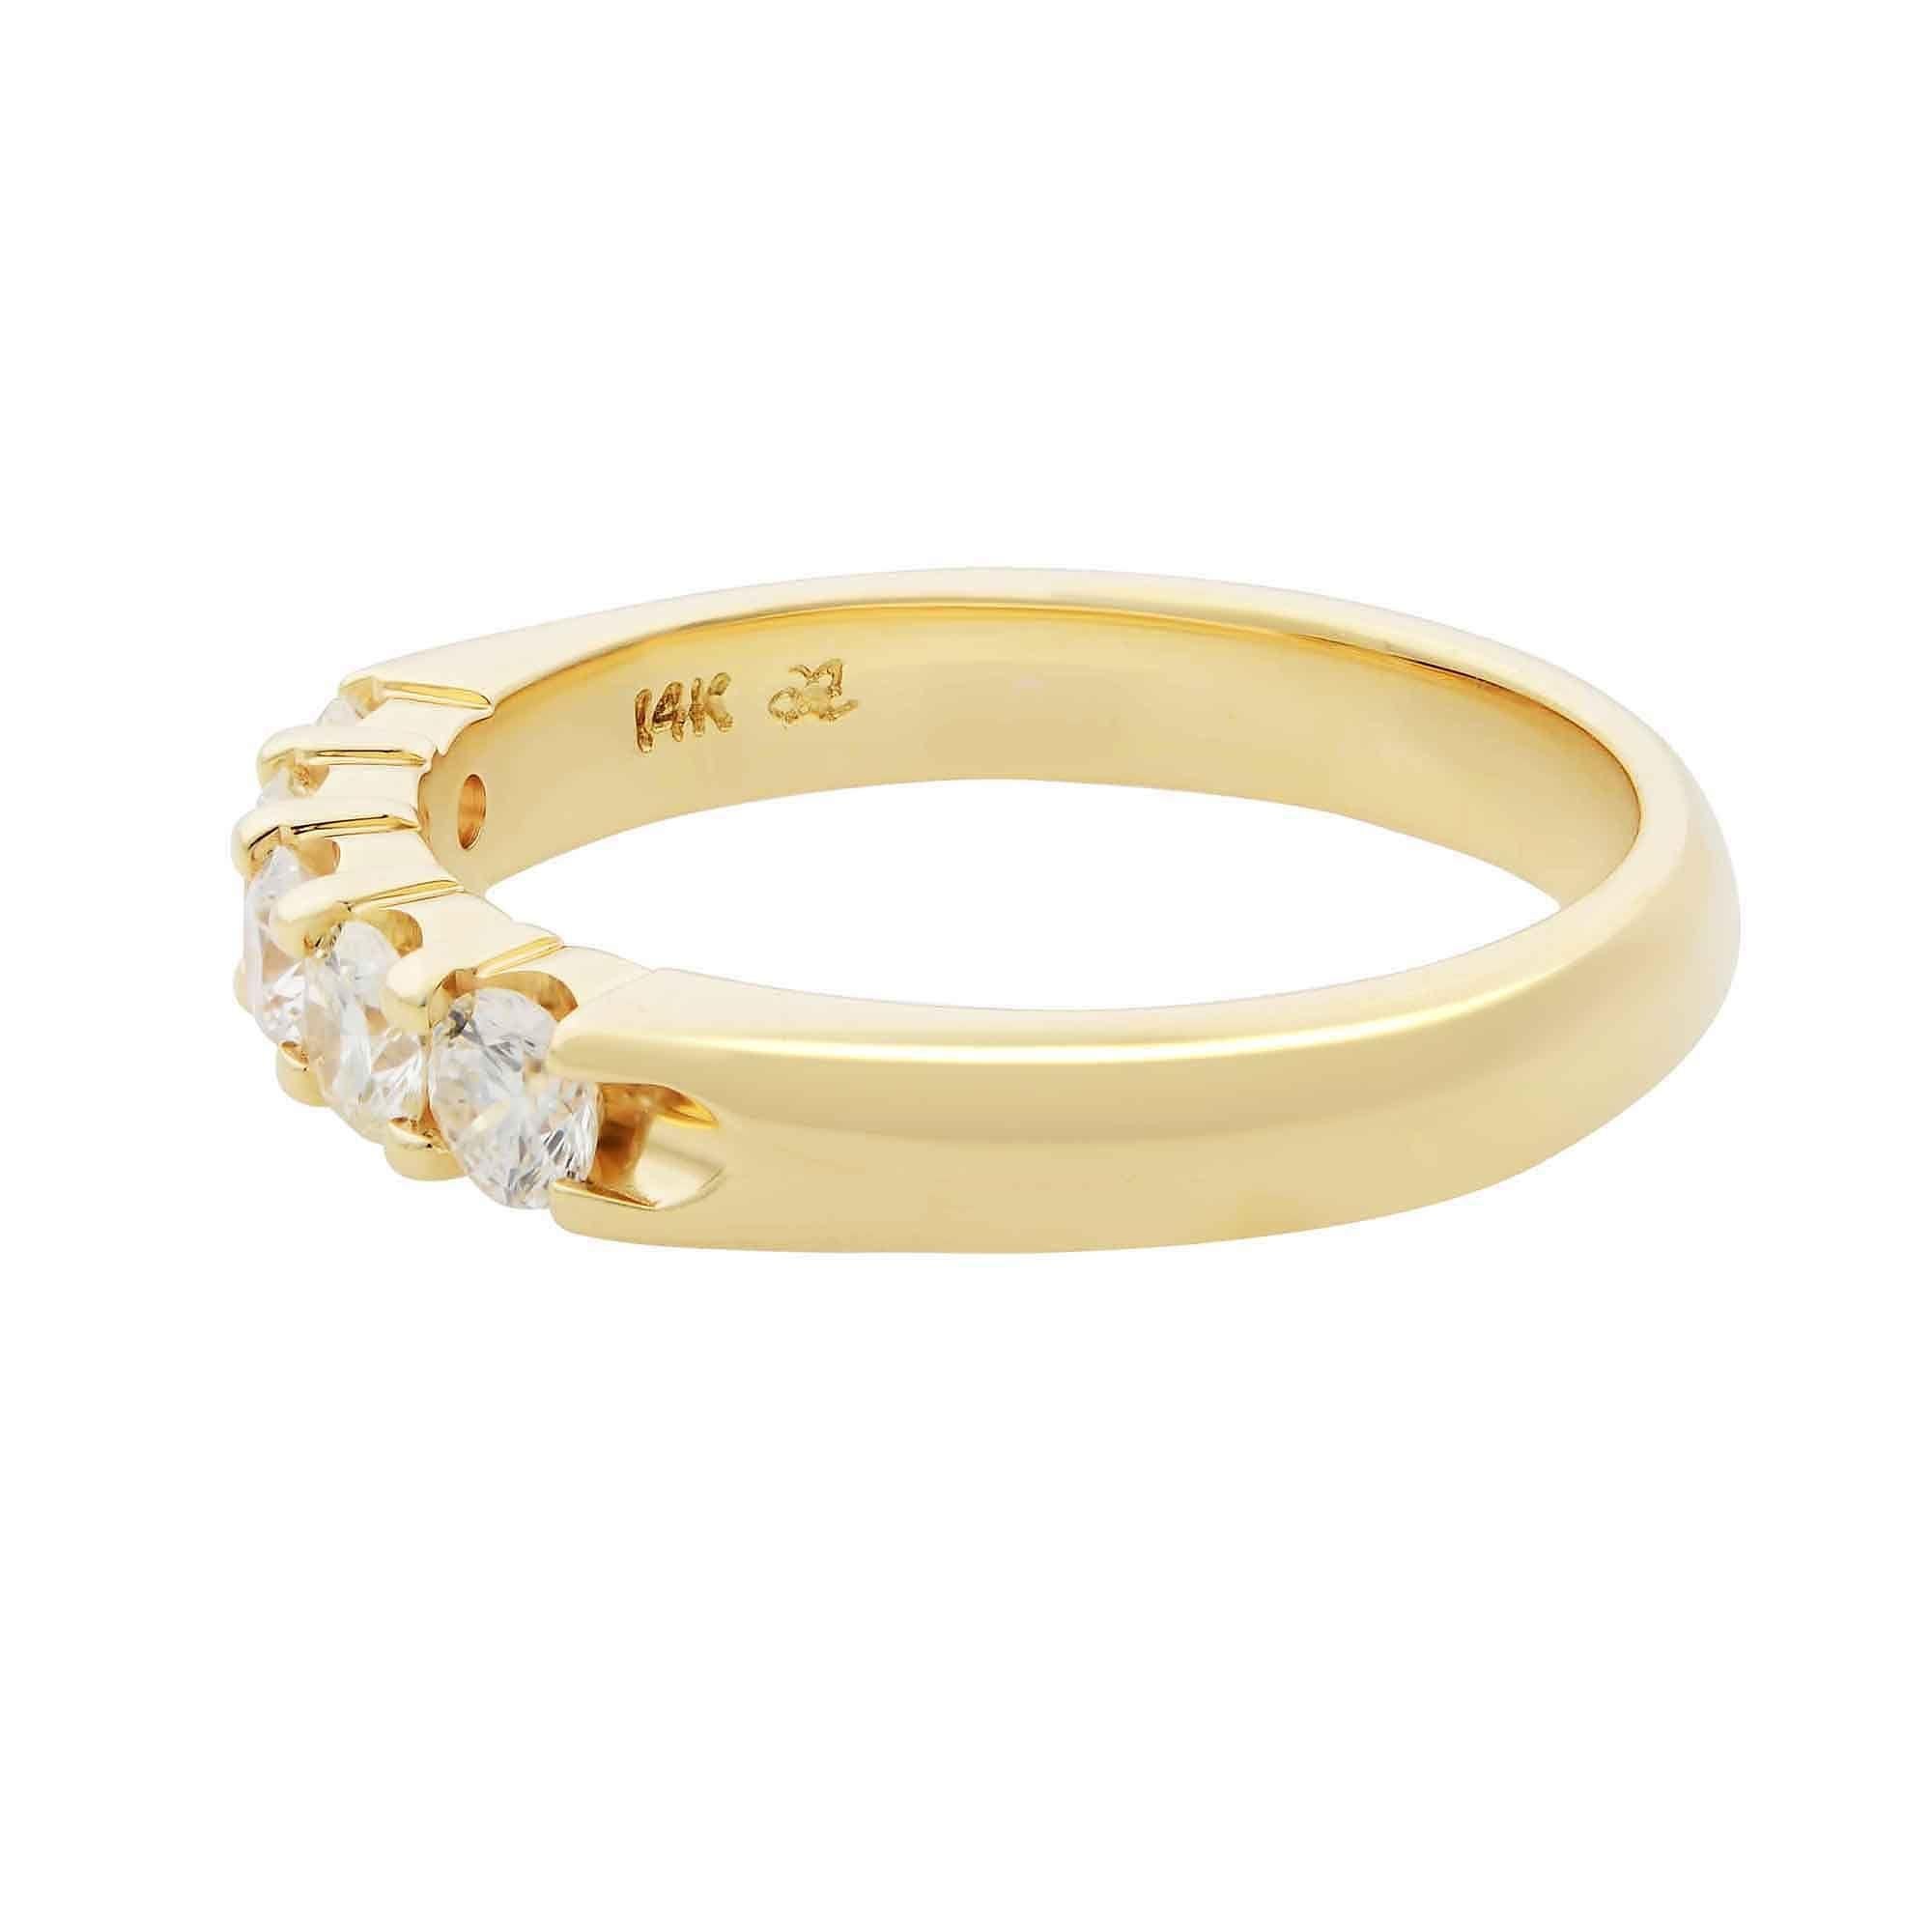 \Five sparkling round cut diamonds are secured in prong setting on this 14k yellow gold band. Exhibiting a half eternity design, this timeless wedding band symbolizes eternal love. Total diamond carat weight is 0.50. Diamonds are VS1 clarity and G